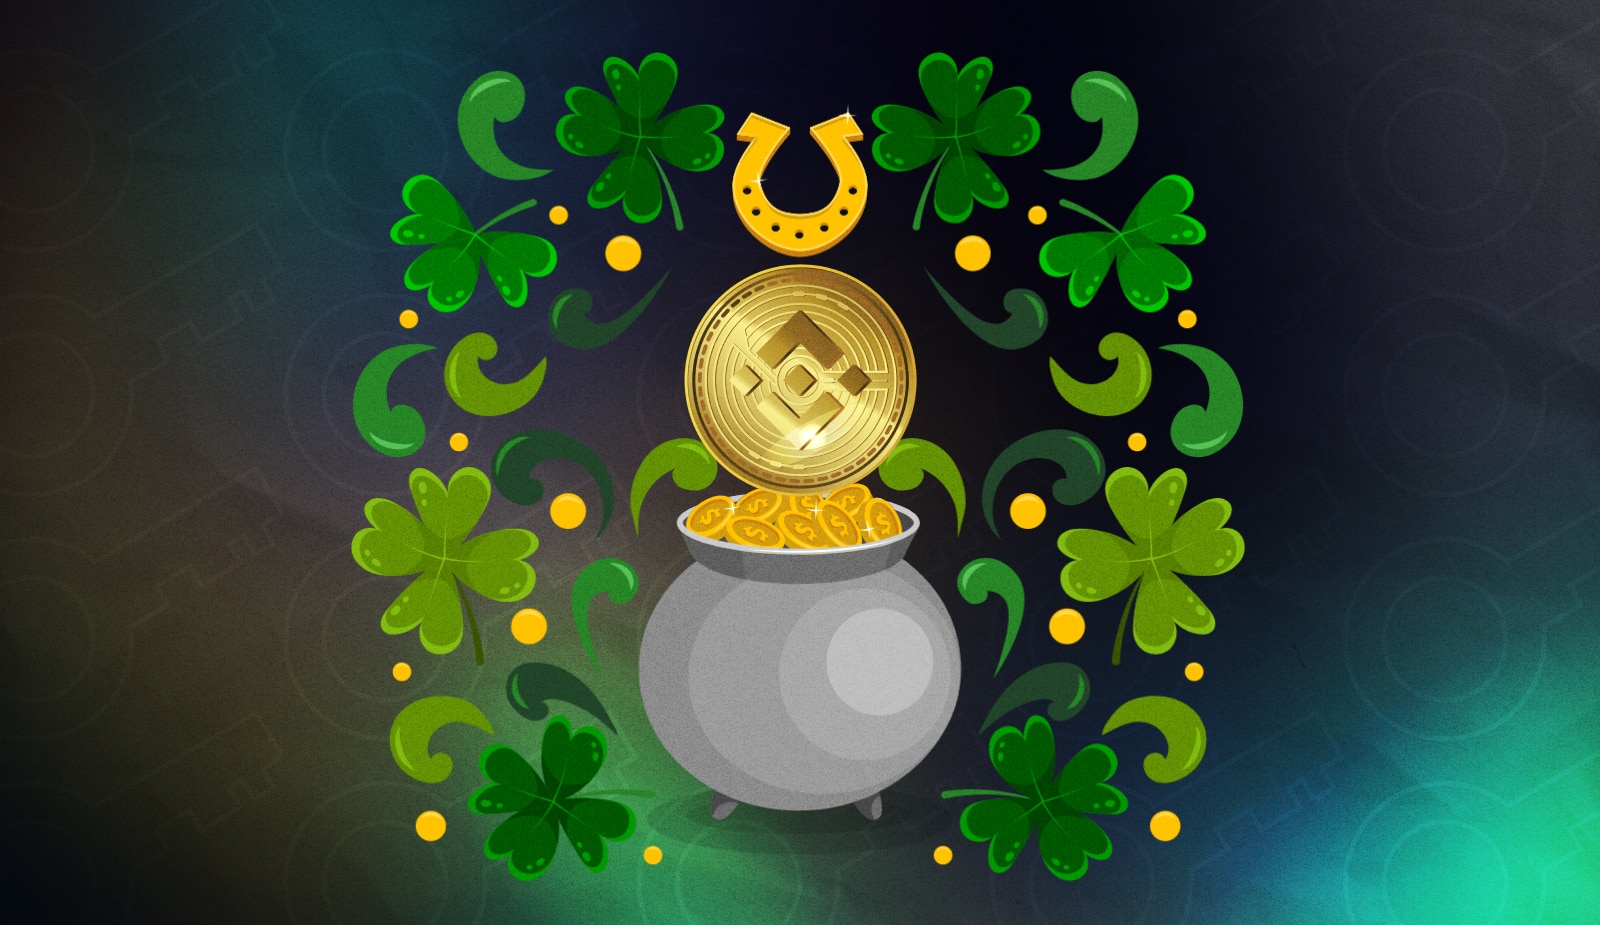 Binance Exchange Opens 7th Subsidiary in Ireland